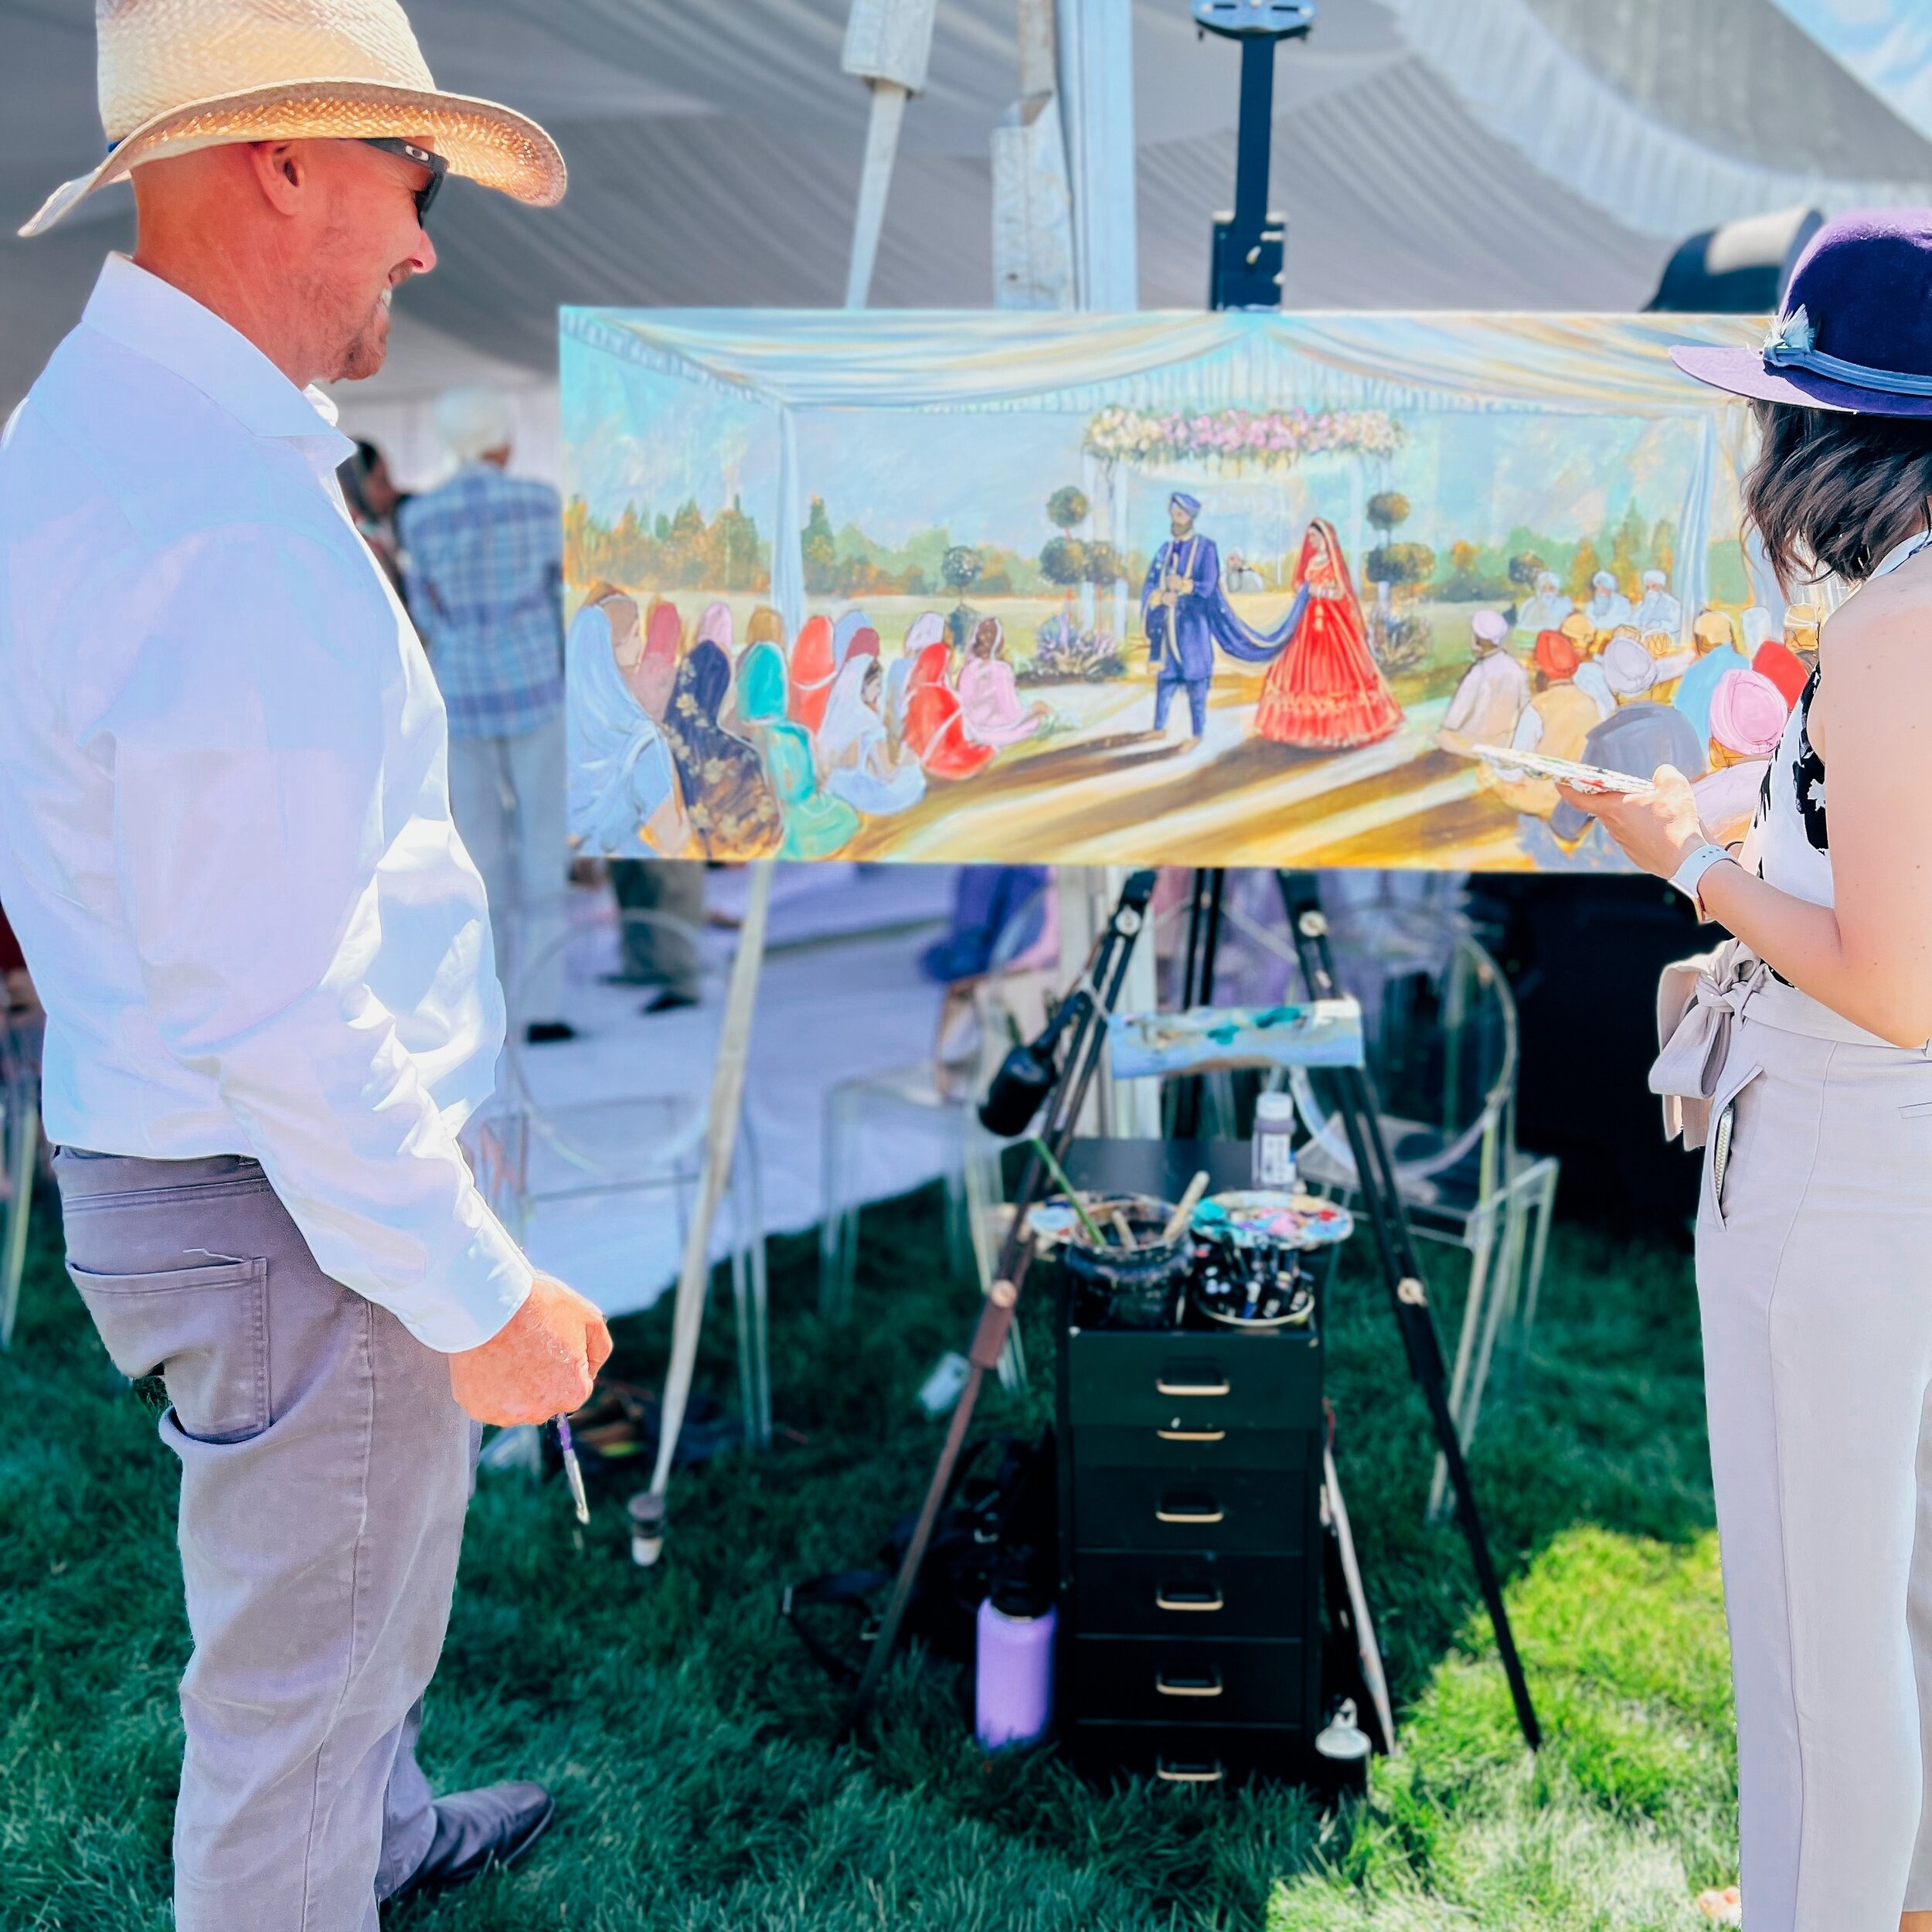 Can&rsquo;t wait to get back to the outdoors and capture  some wedding magic on canvas! 
Thank you to @jennasmillieart for this capture.
.
#weddingpainter #outdoorweddingceremony #indianweddingceremony #vancouverweddings